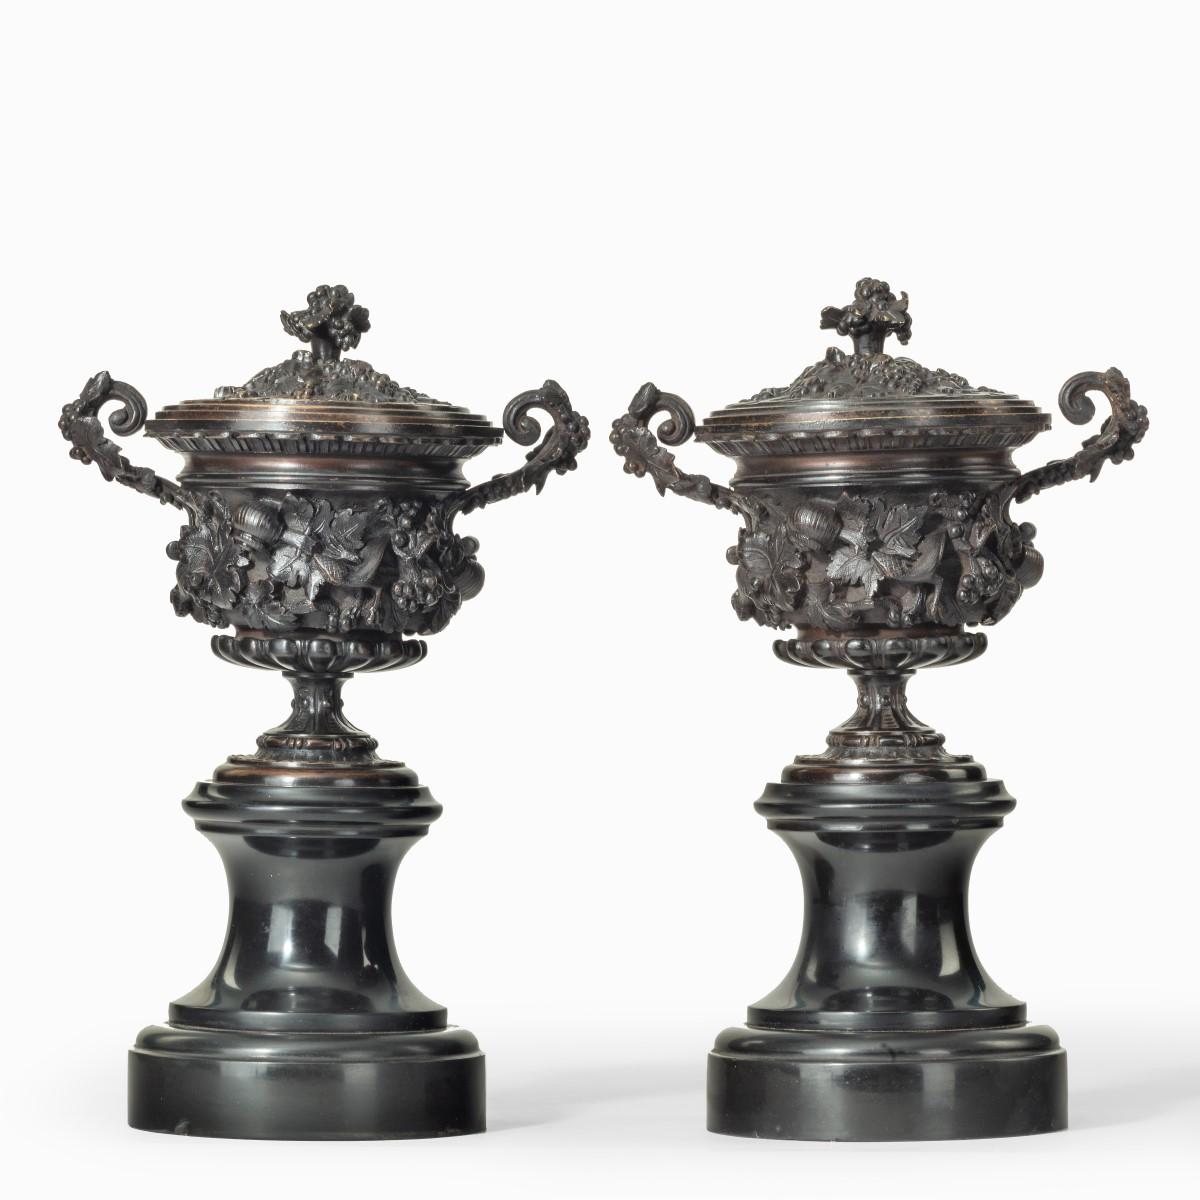 A Fine Pair of Bronze Urns or Vases and Covers c.1870 For Sale 1